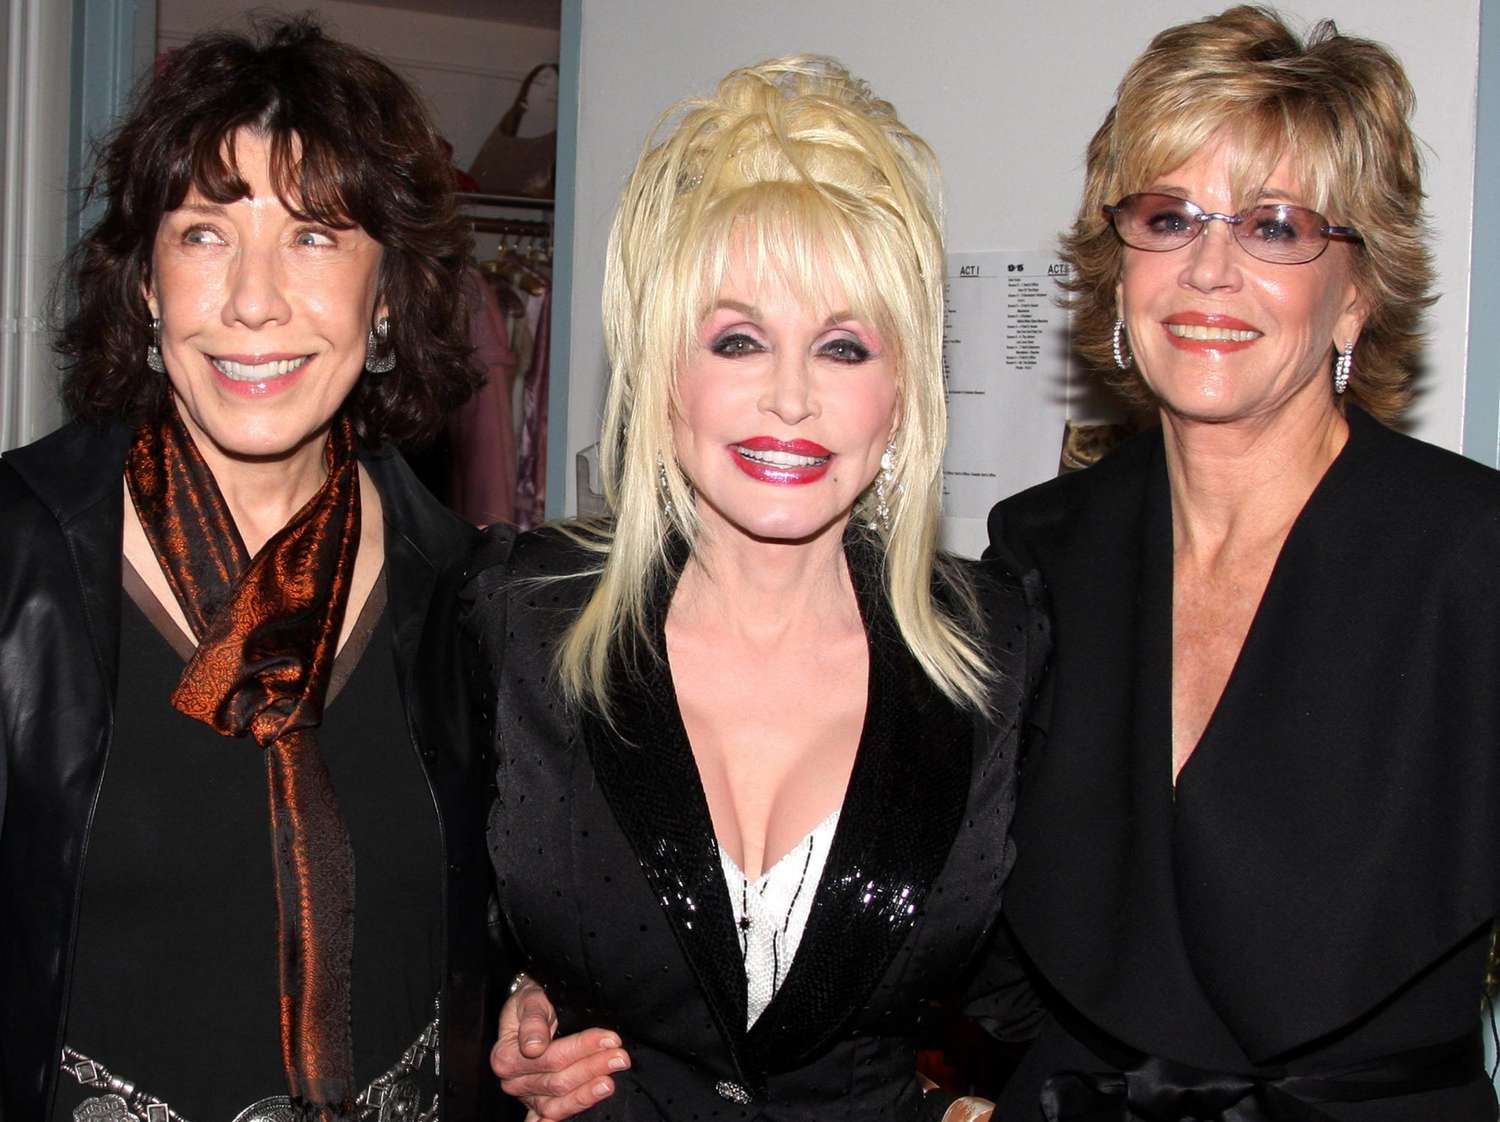 "9 to 5: The Musical" Opening Night In Los Angeles